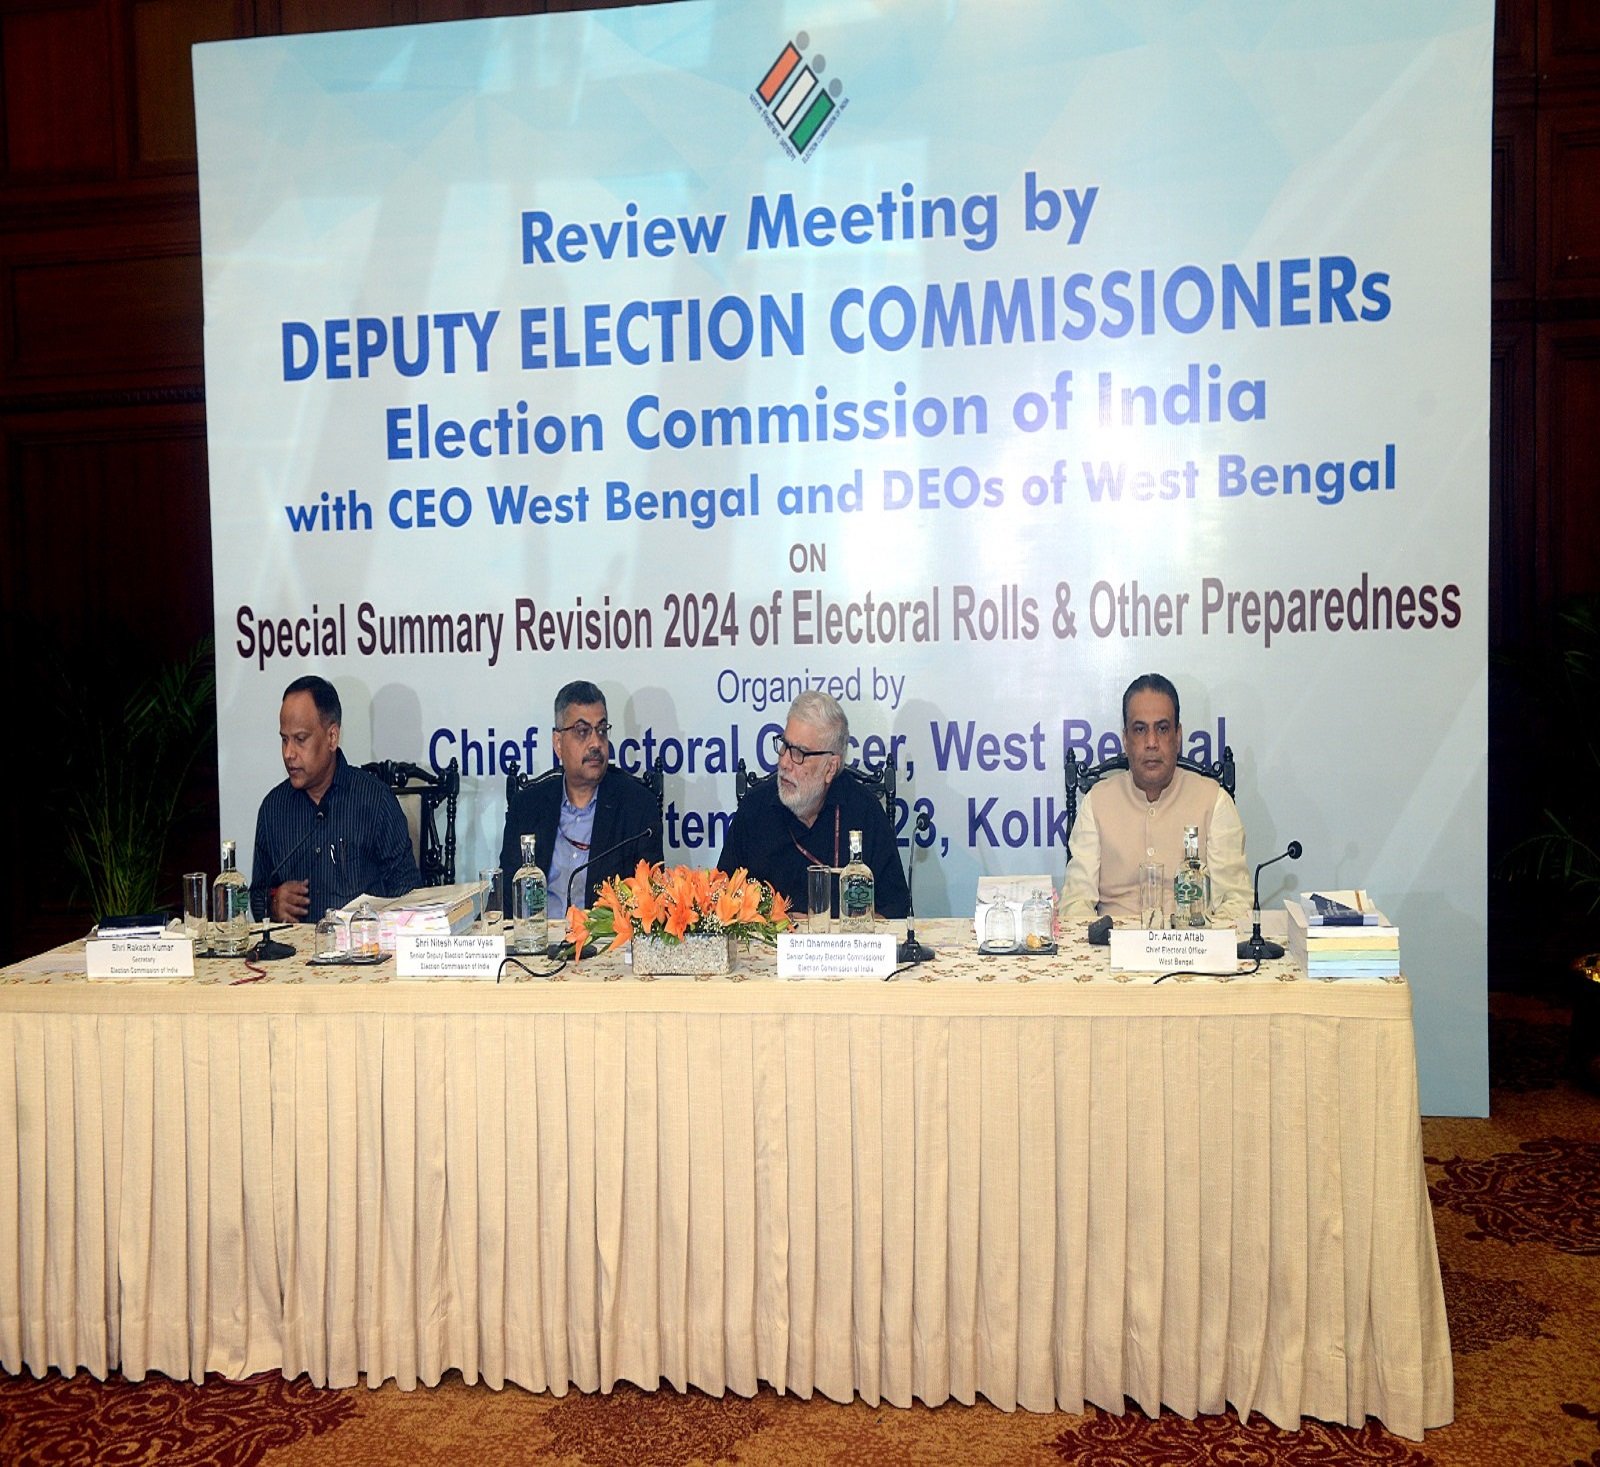 The Role of CEO of West Bengal in Election Management